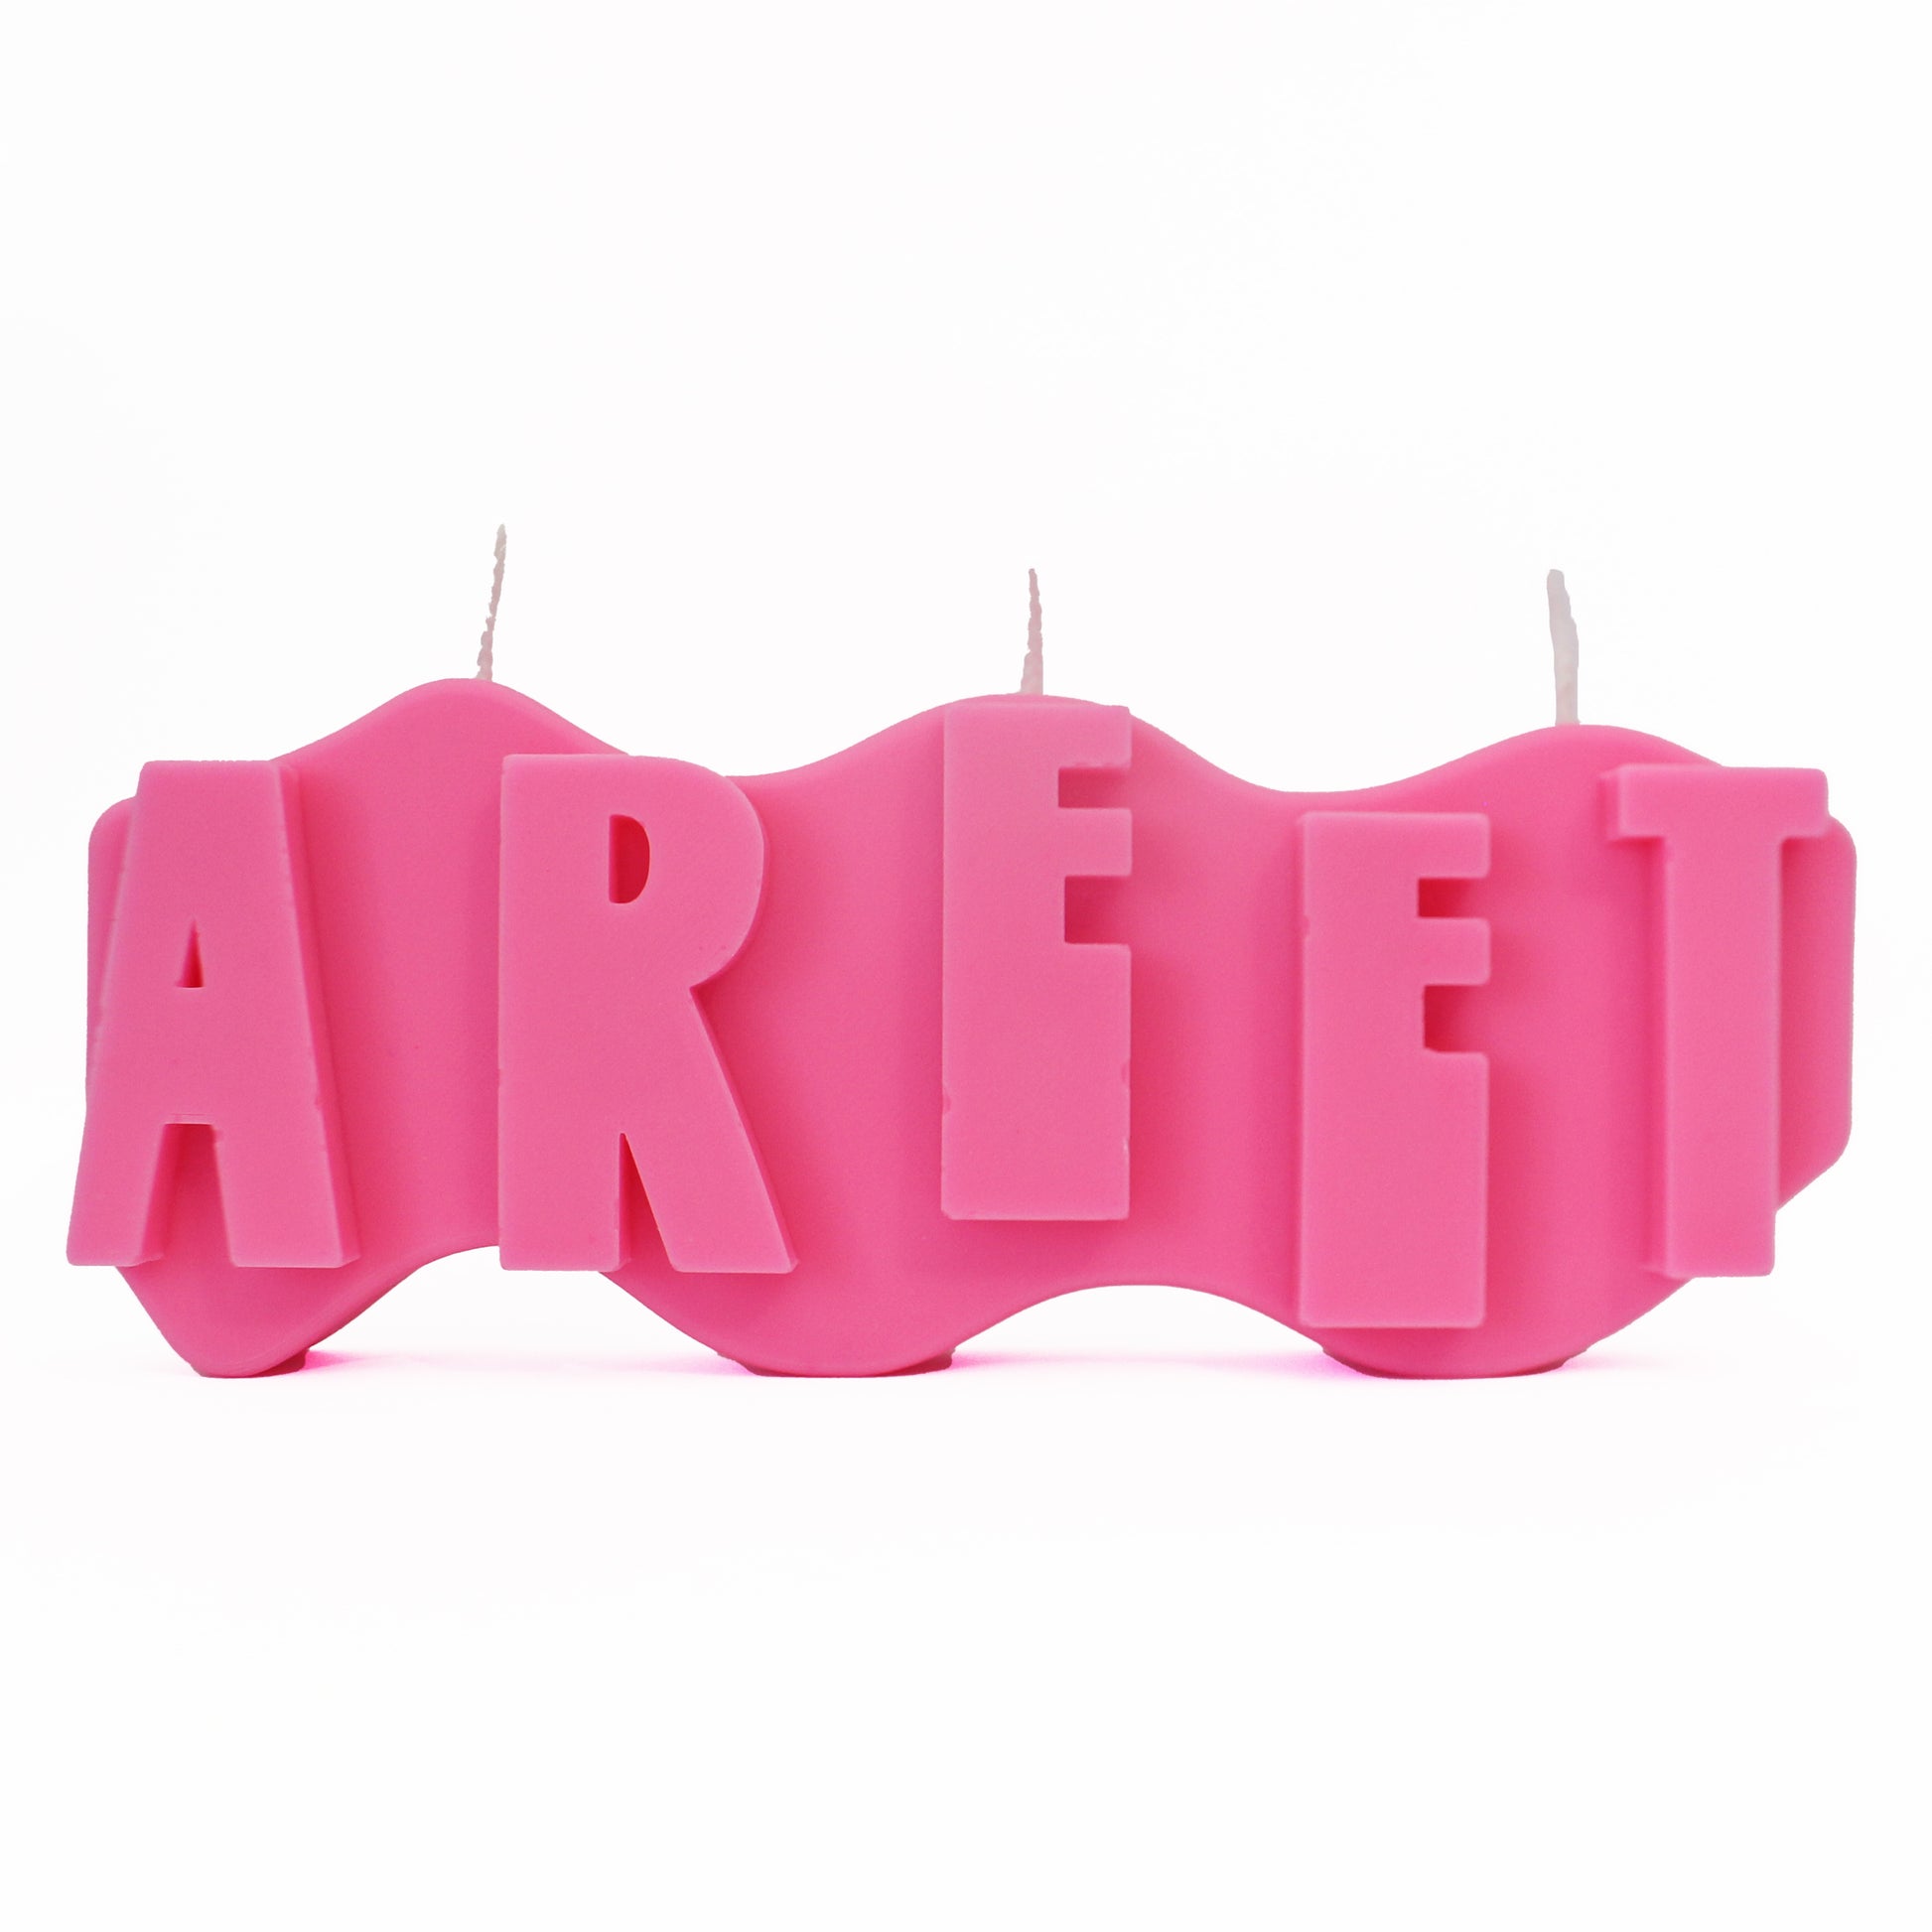 A decorative candle with a wavey body and protruding text. Measuring 17cm long and 7cm high. The candle is neon pink with raised letters spelling AREET from left to right. It has three wicks spread across the top of the body evenly. 